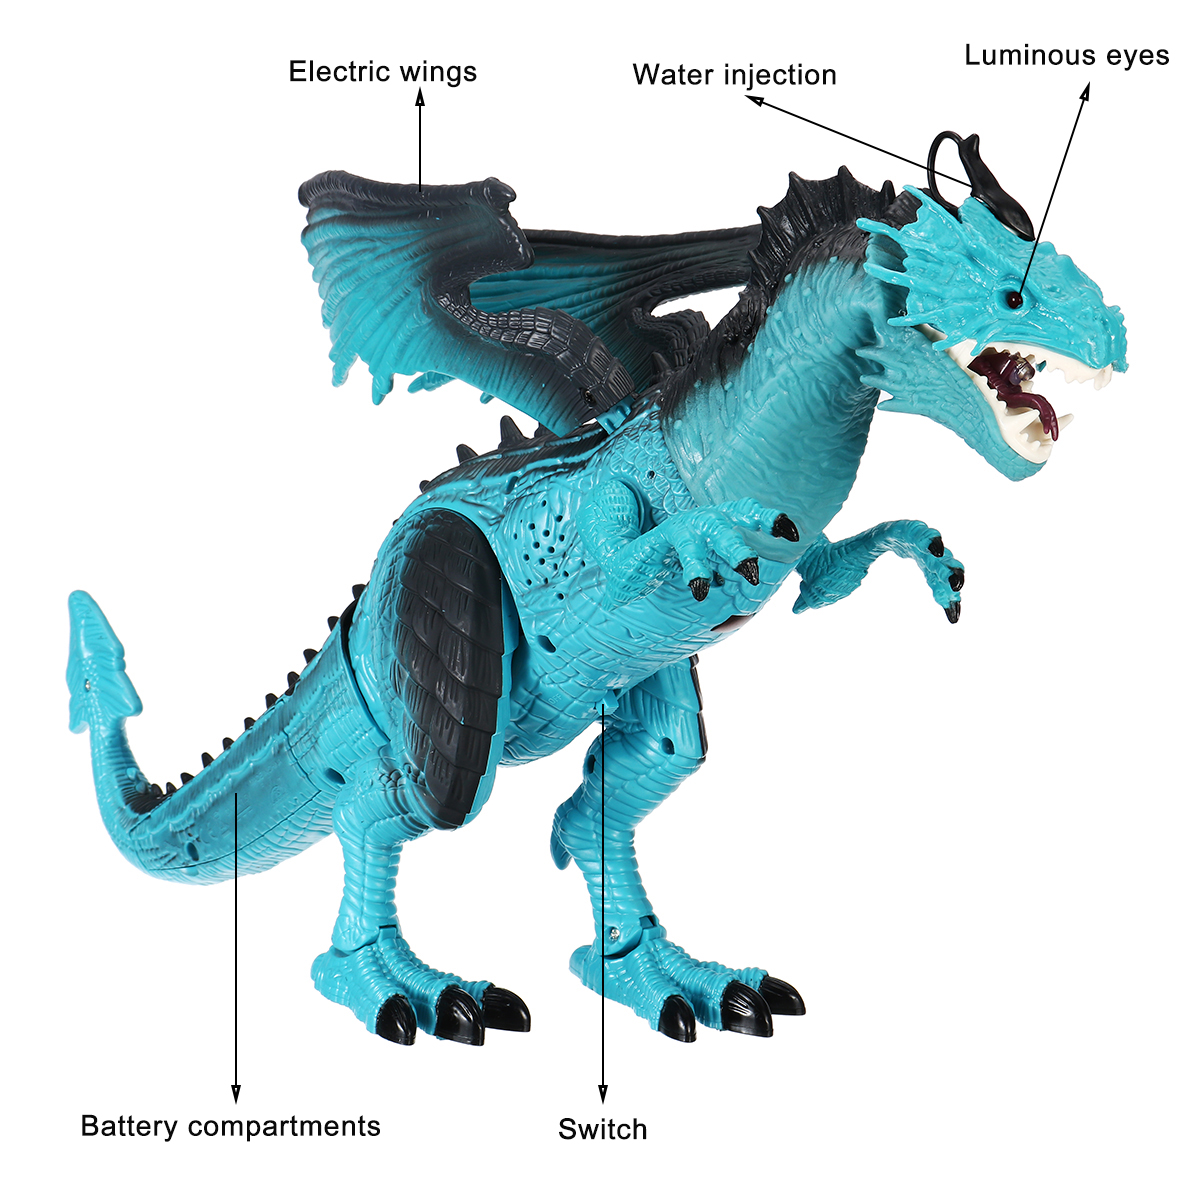 Remote-Control-360deg-Rotate-Spray-Dinosaur-with-Sound-LED-Light-and-Simulate-Flame-Diecast-Model-To-1773231-9